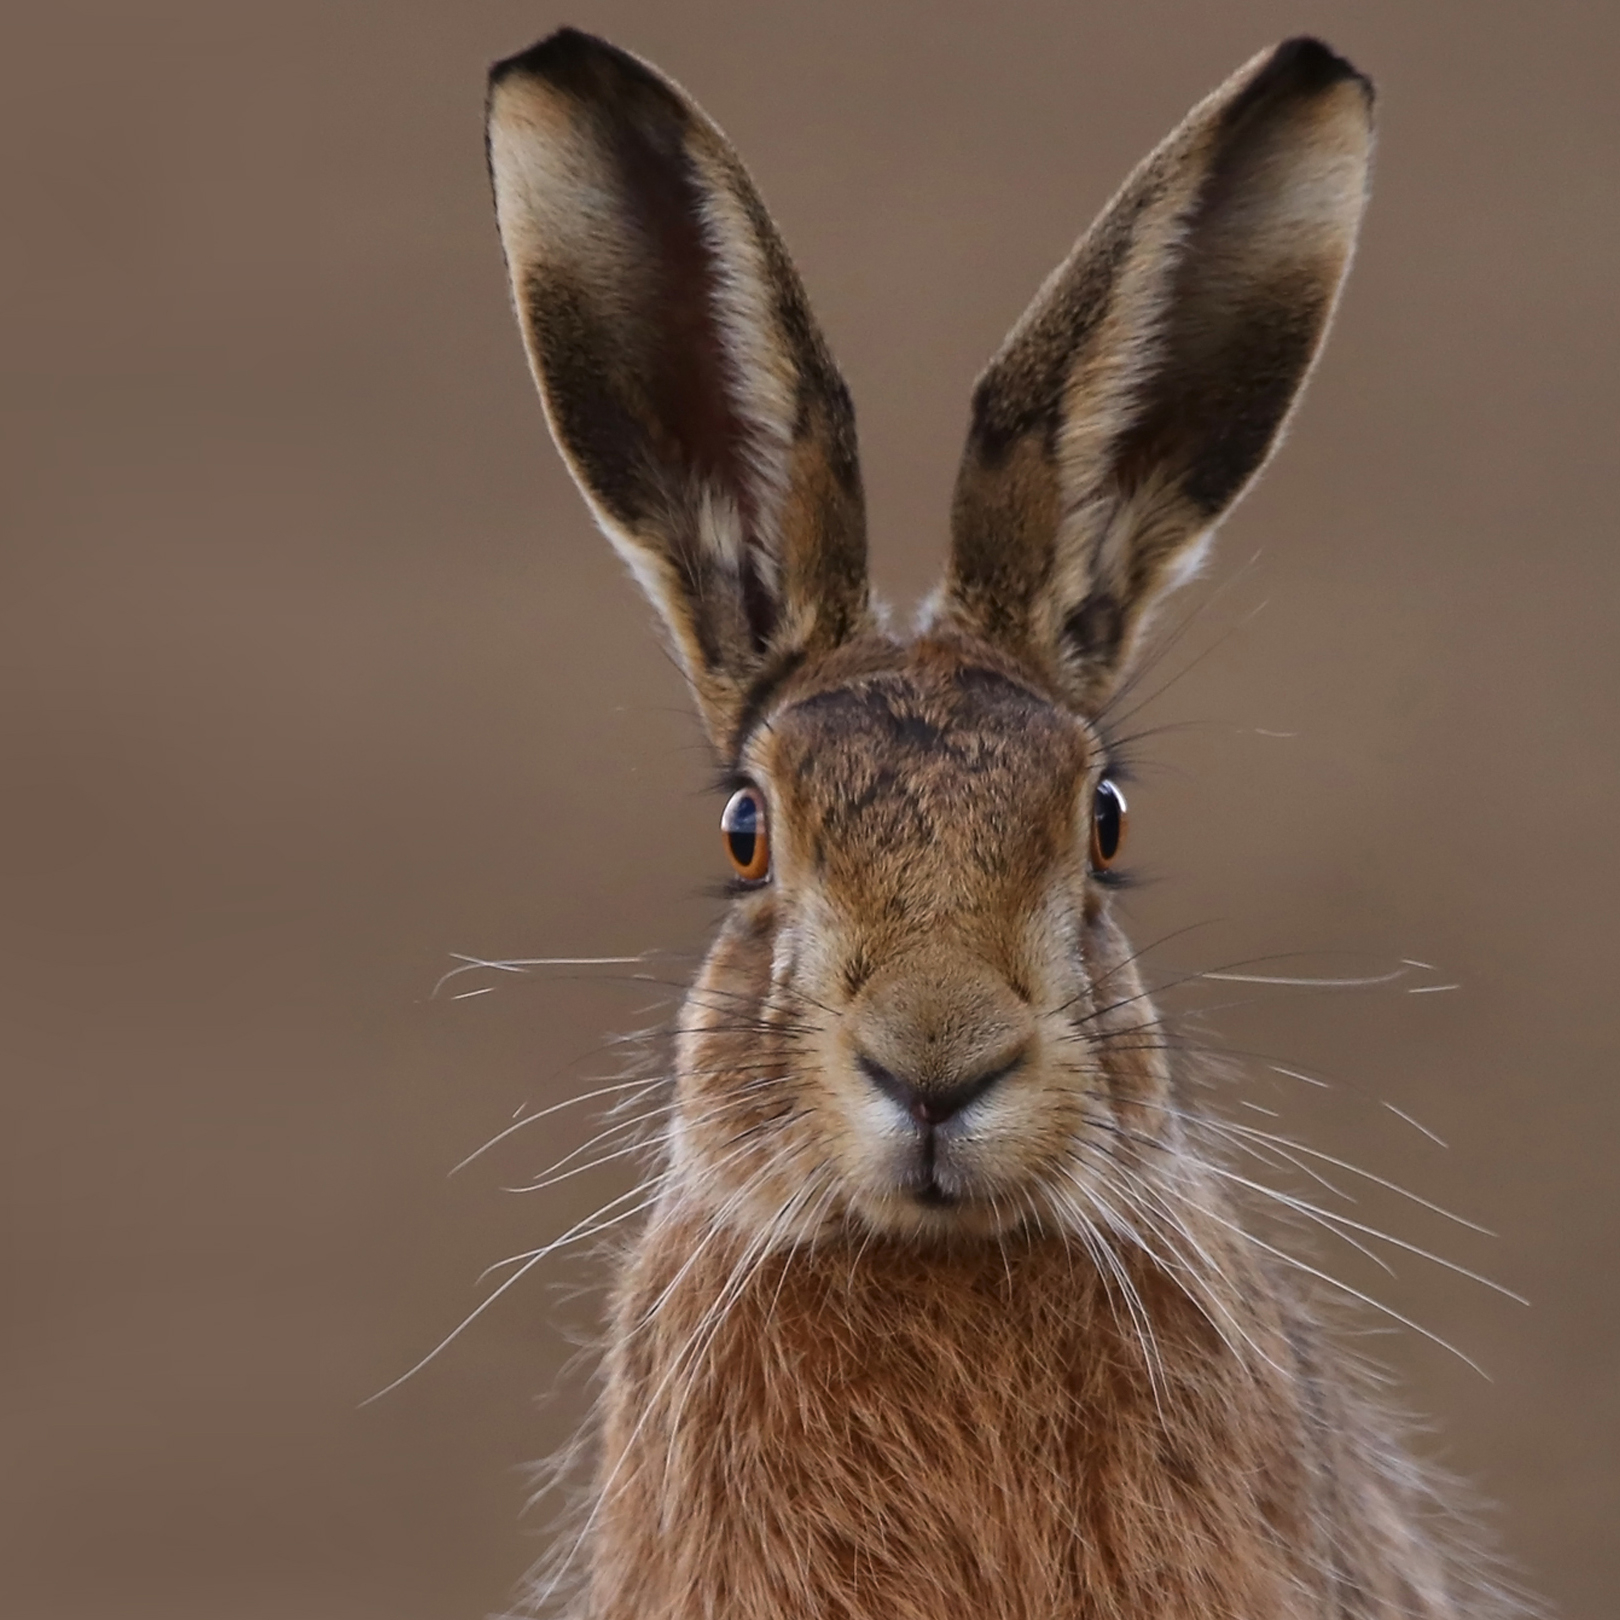 A brown hare facing the camera